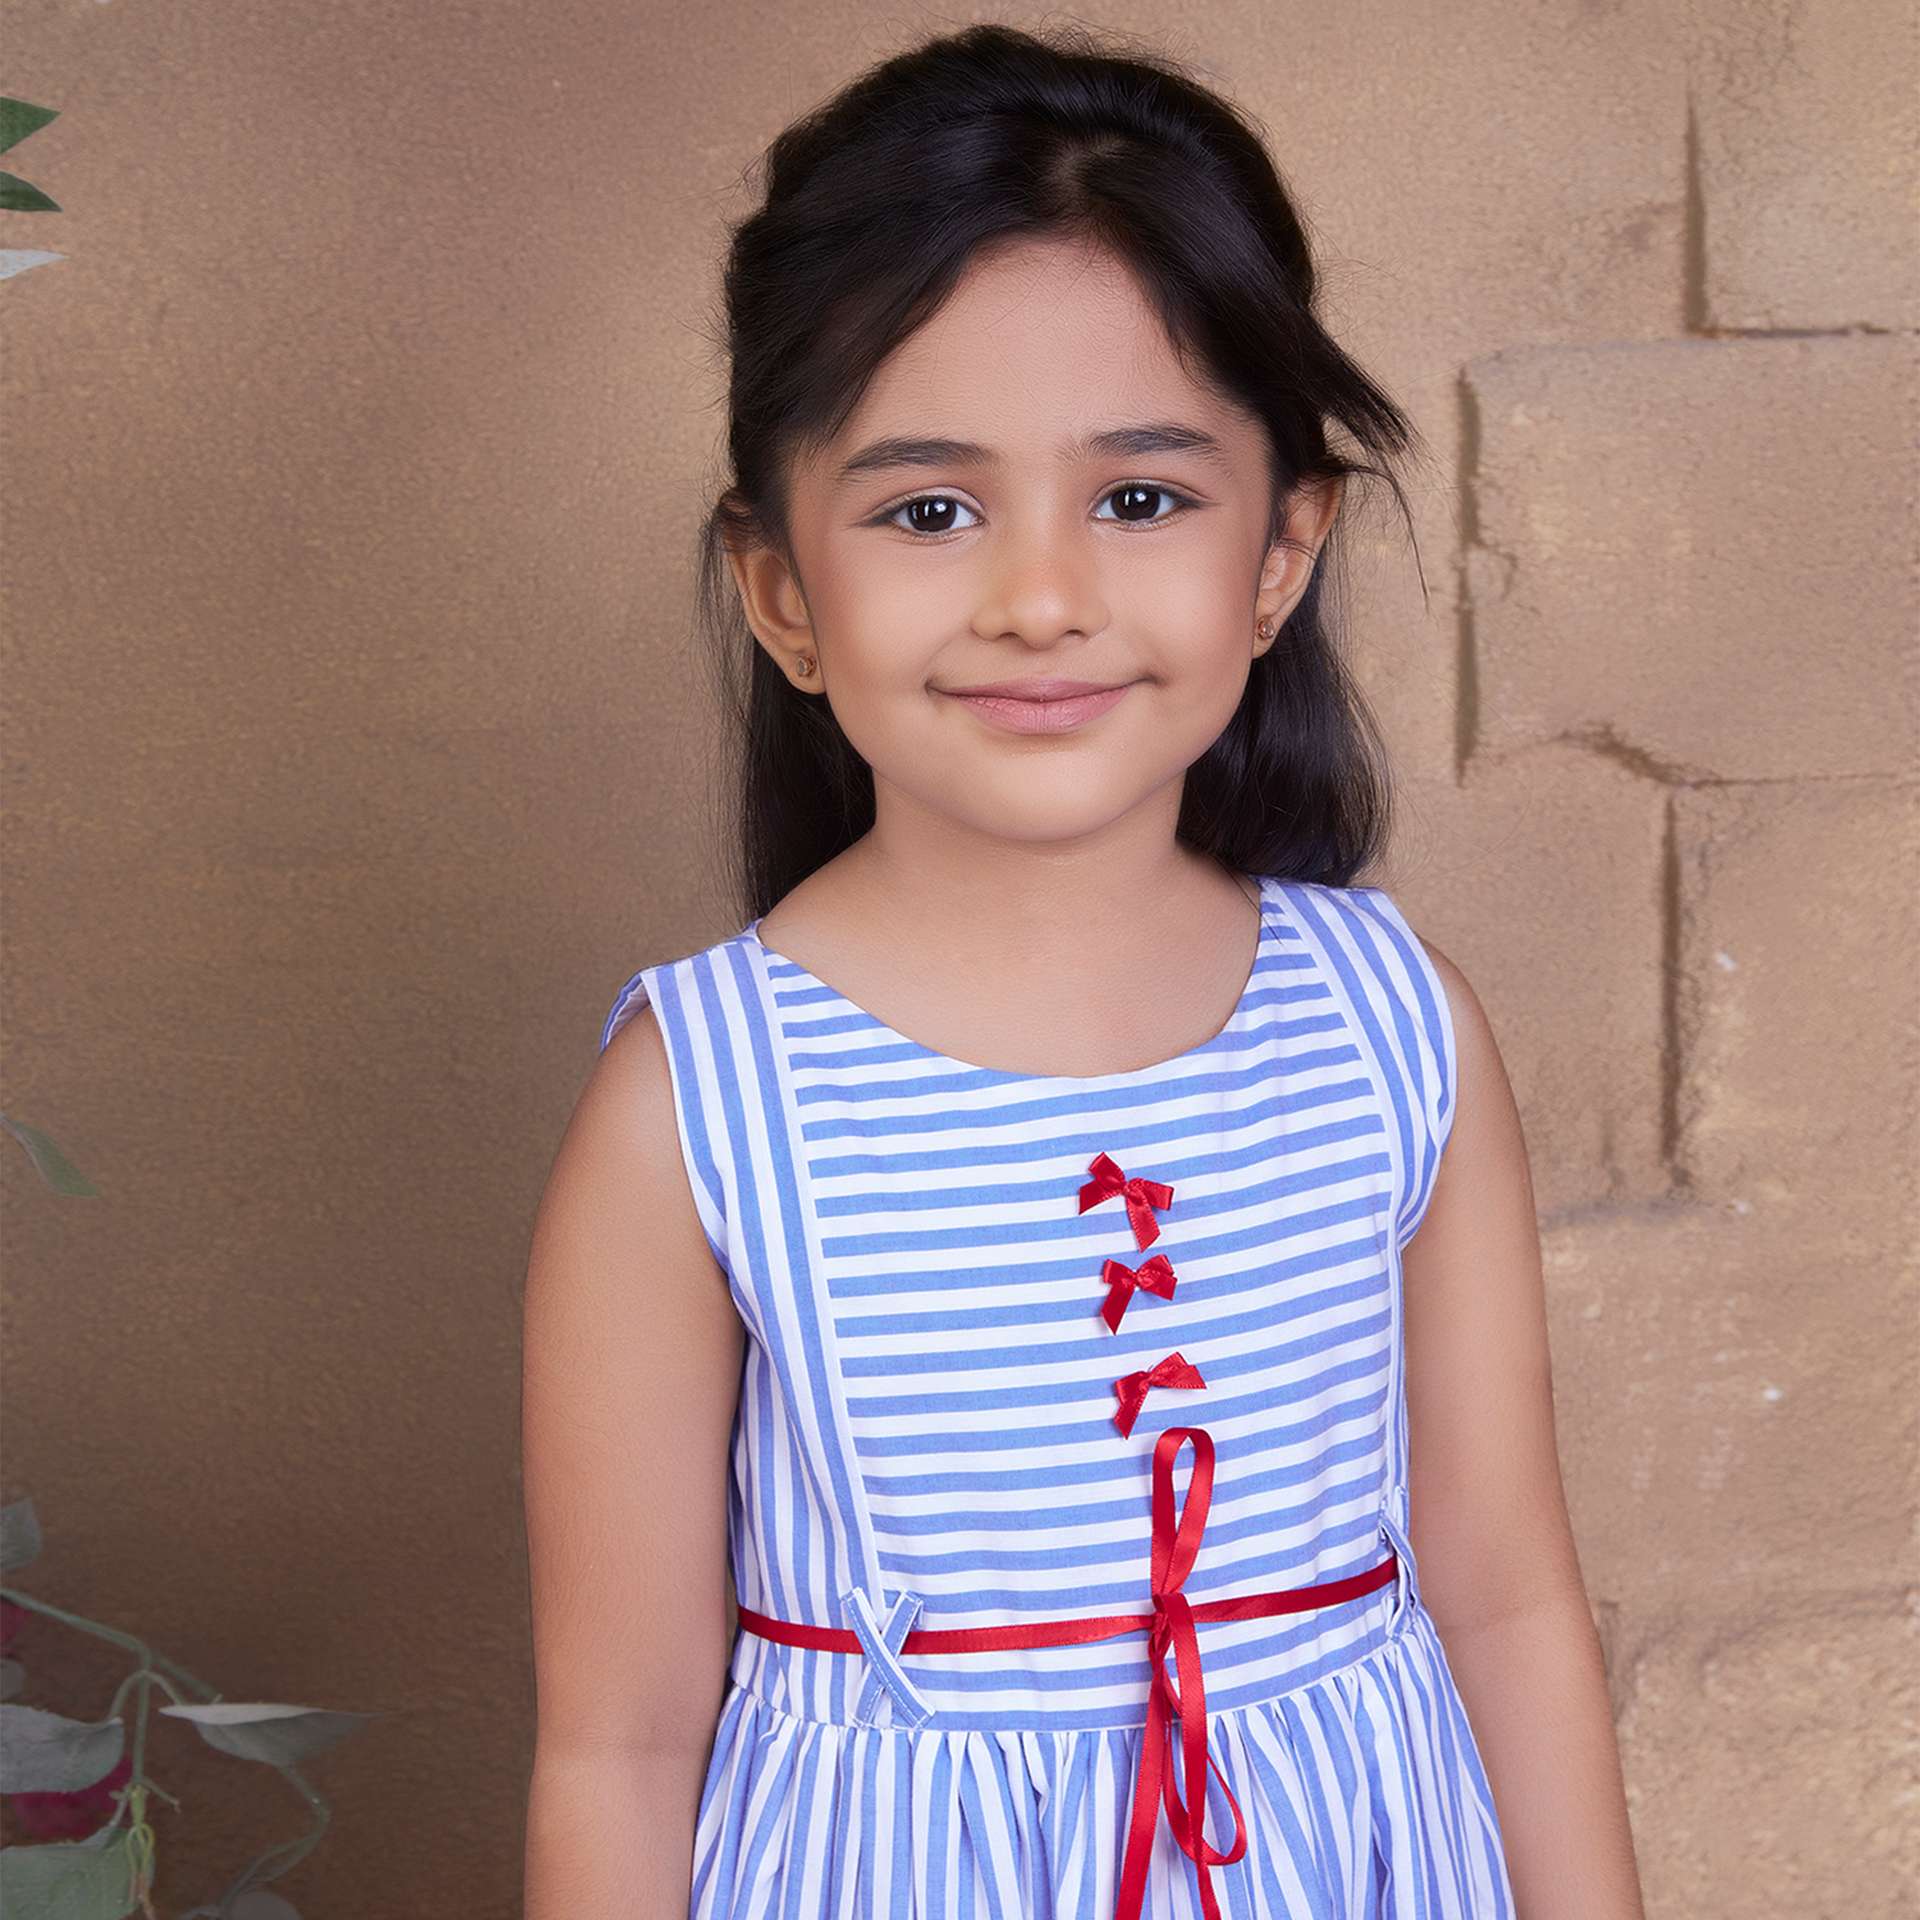 Girl smiling wearing a blue stripe sleeveless outfit with red bows